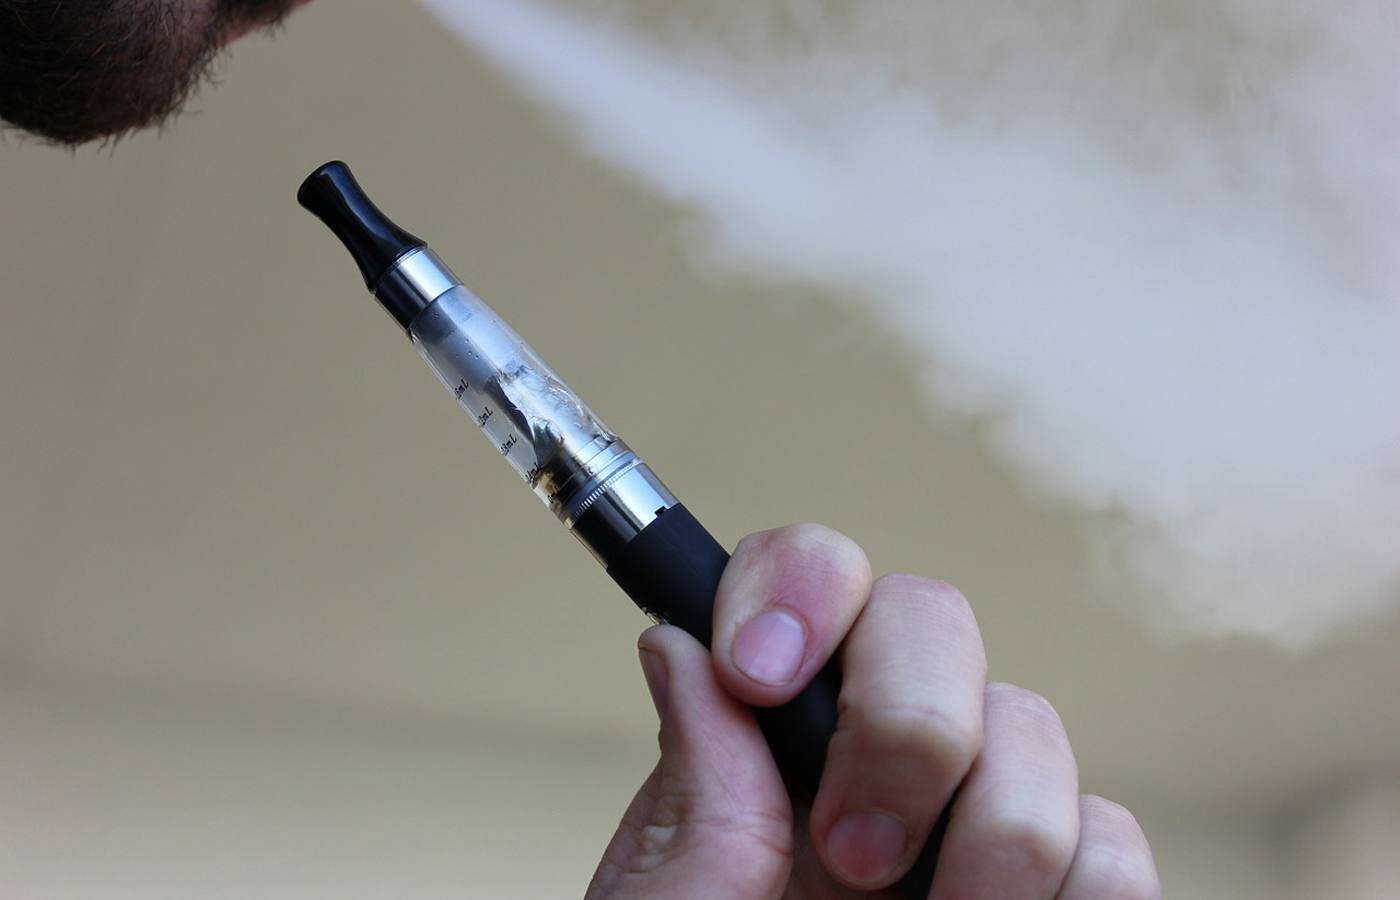 The Most Expensive Vape Mod You Can Buy: Why it's totally worth it